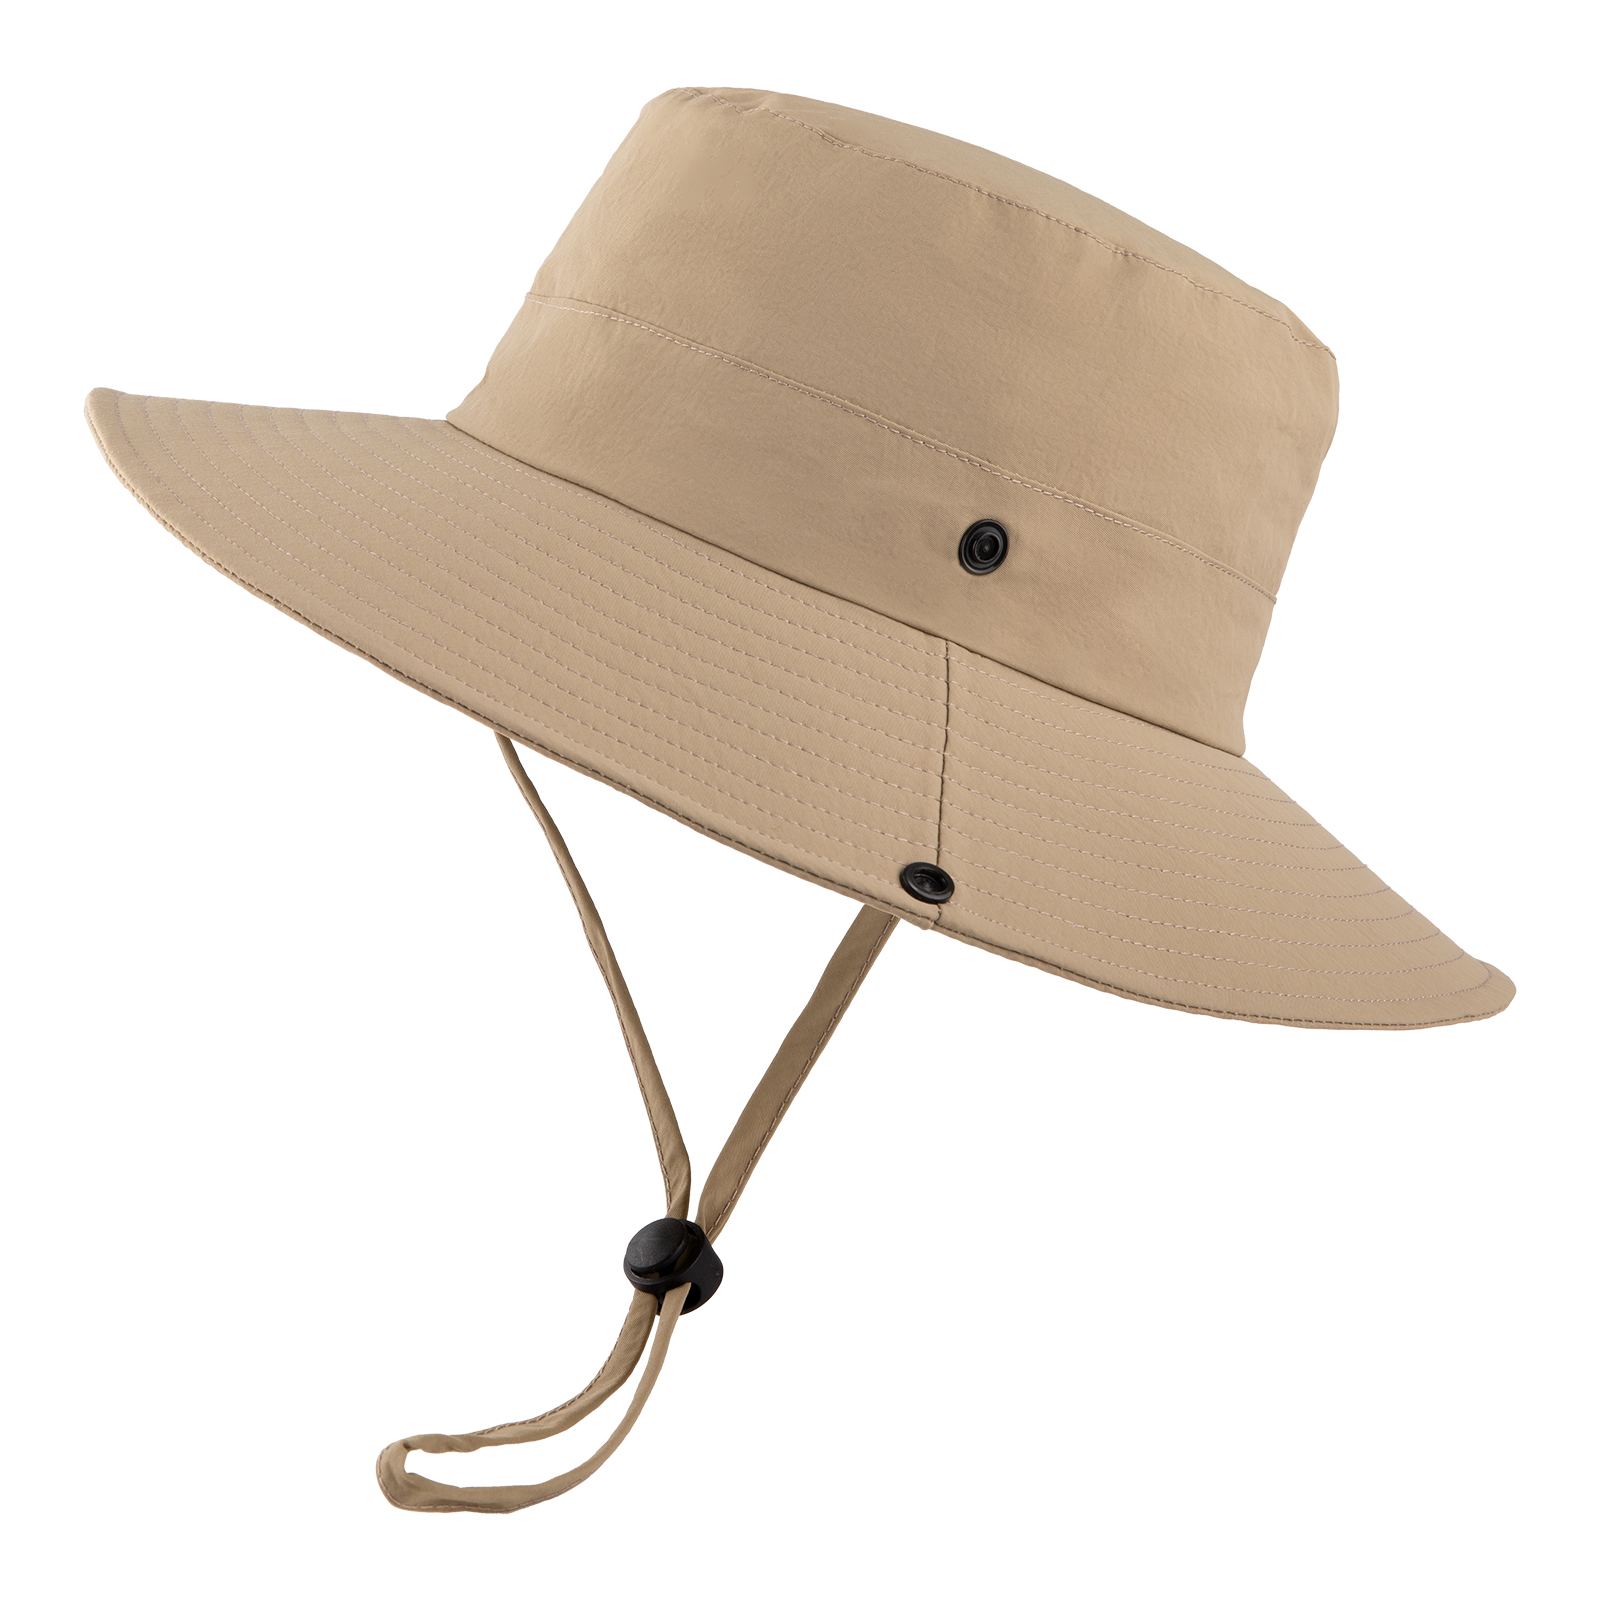 COOPLUS Sun Hats for Men Women Fishing Hat Breathable Wide Brim Summer UV Protection Hat - image 4 of 5